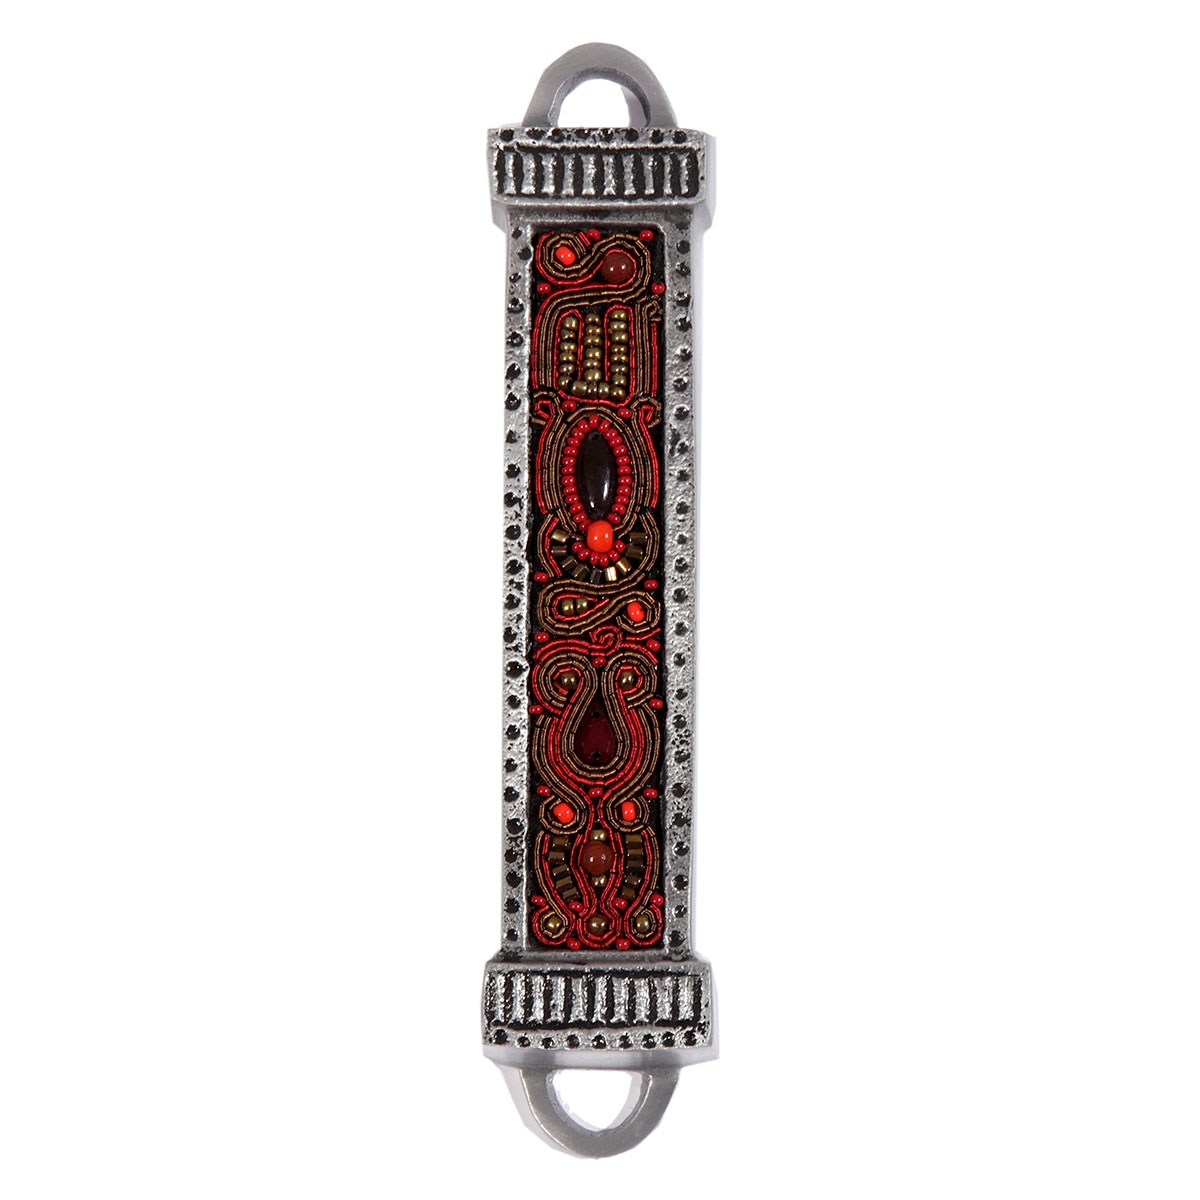  Yair Emanuel Aluminum Mezuzah with Embroidered Beads-Red/Black - 1